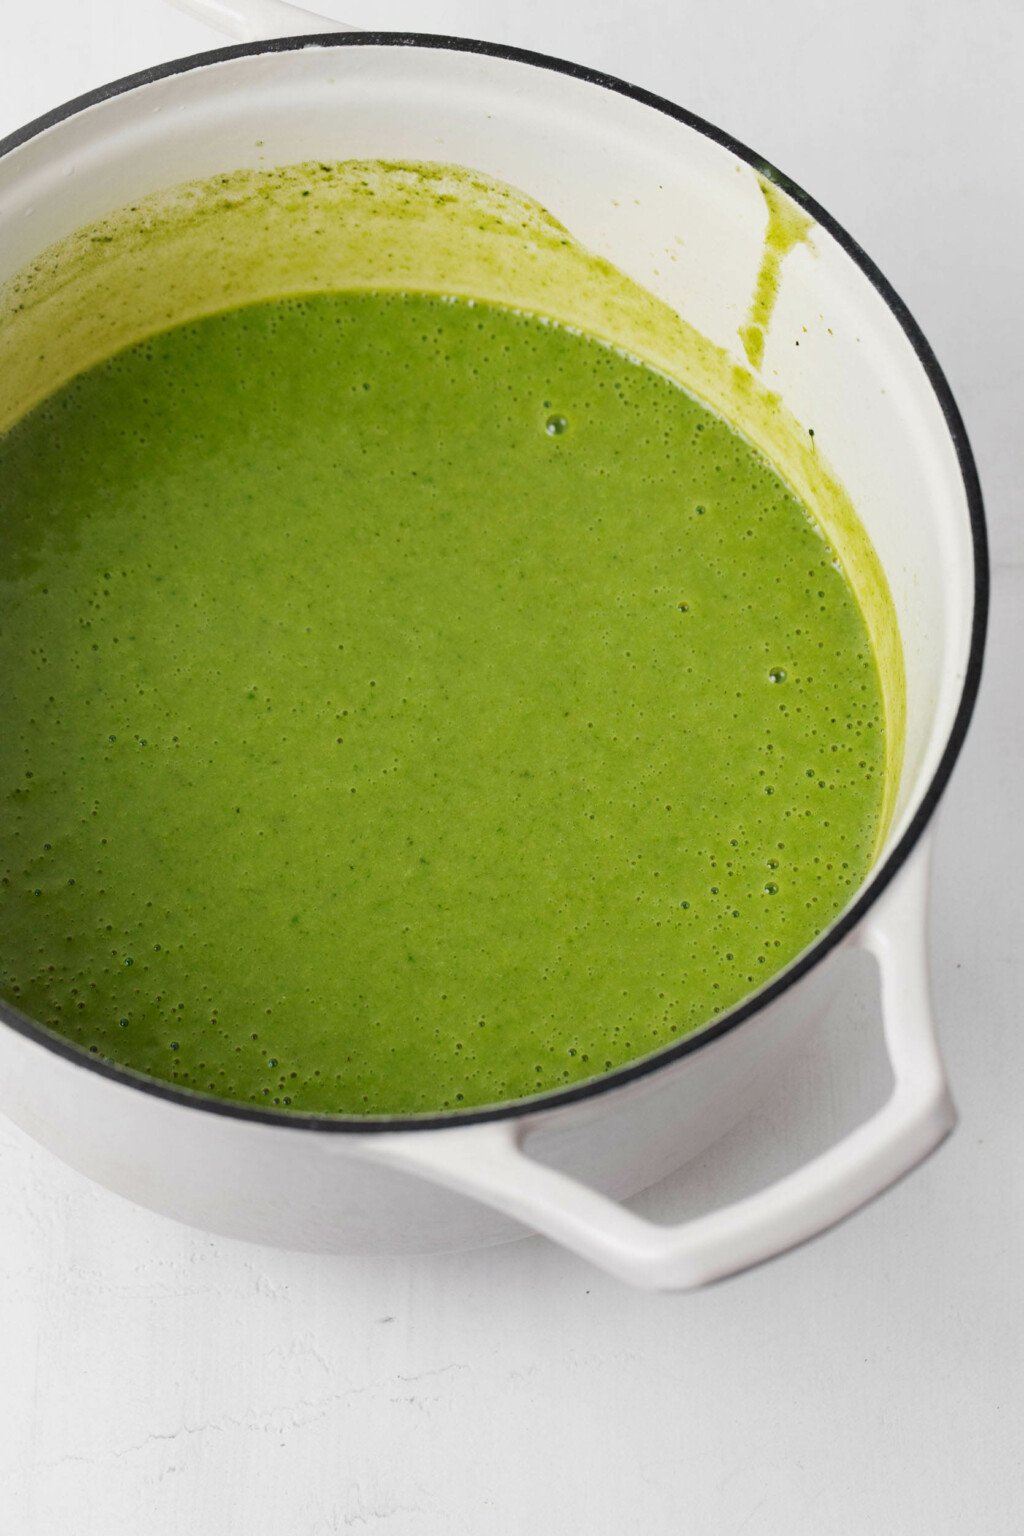 A simple green soup is being warmed in a white soup pot with a dark rim.